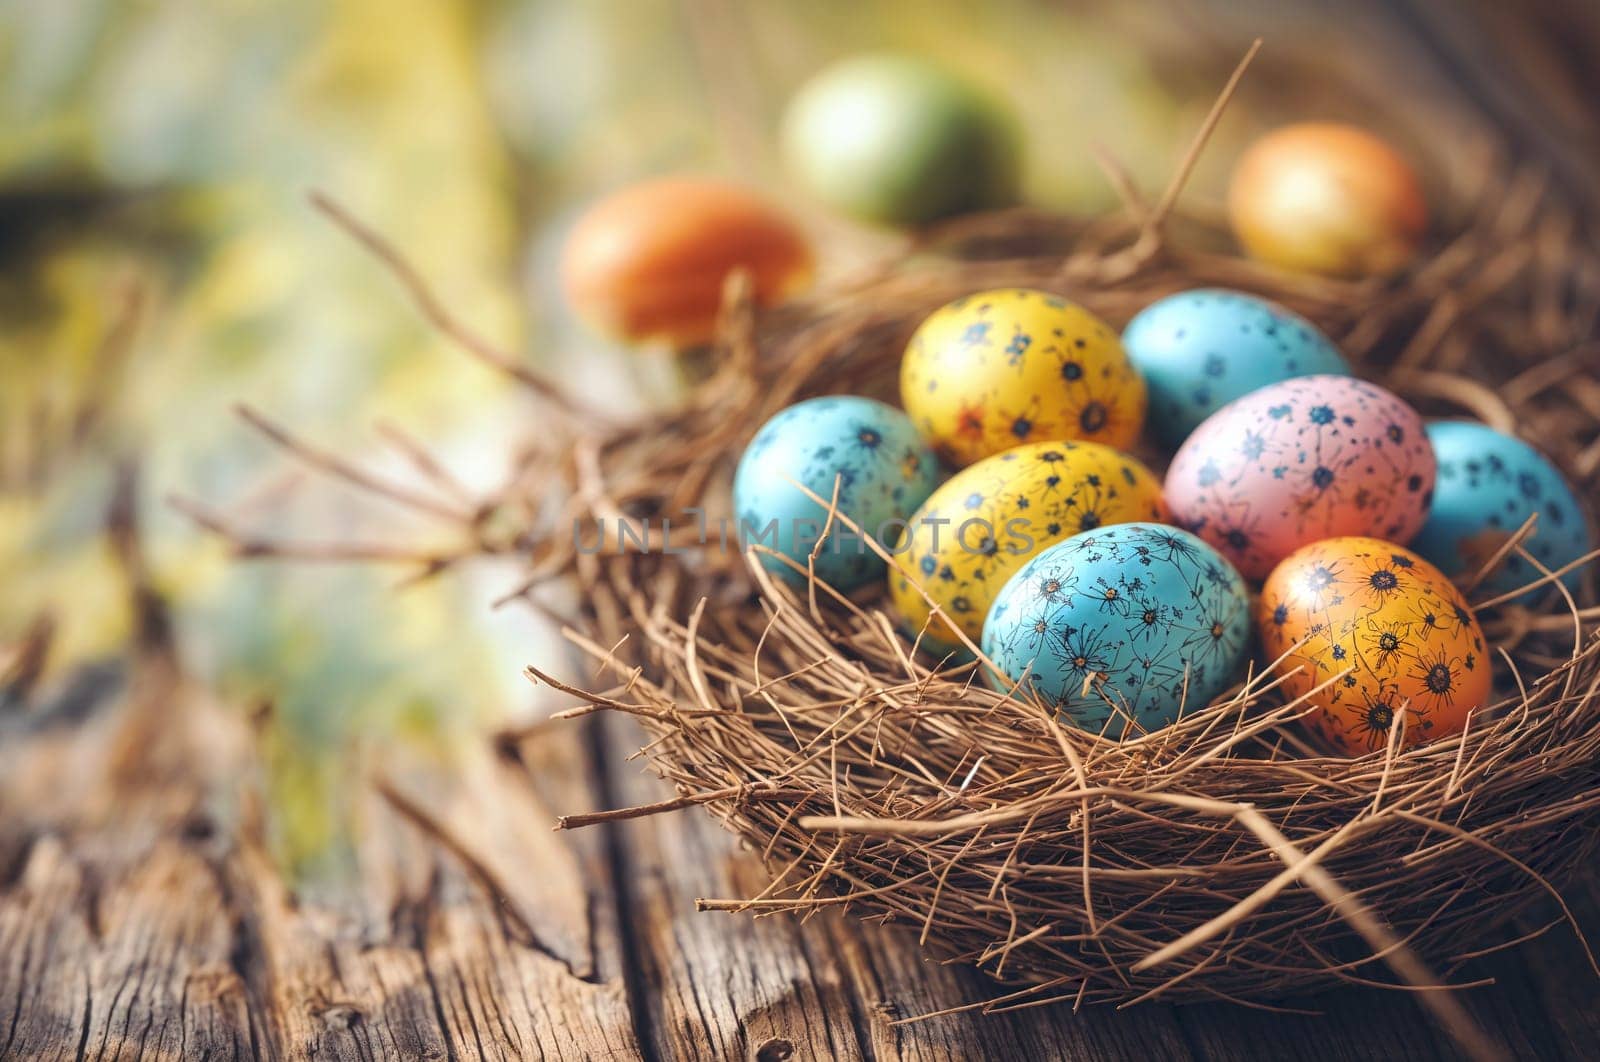 Colorful Easter Eggs Nestled in a Straw Nest on a Rustic Wooden Surface by chrisroll